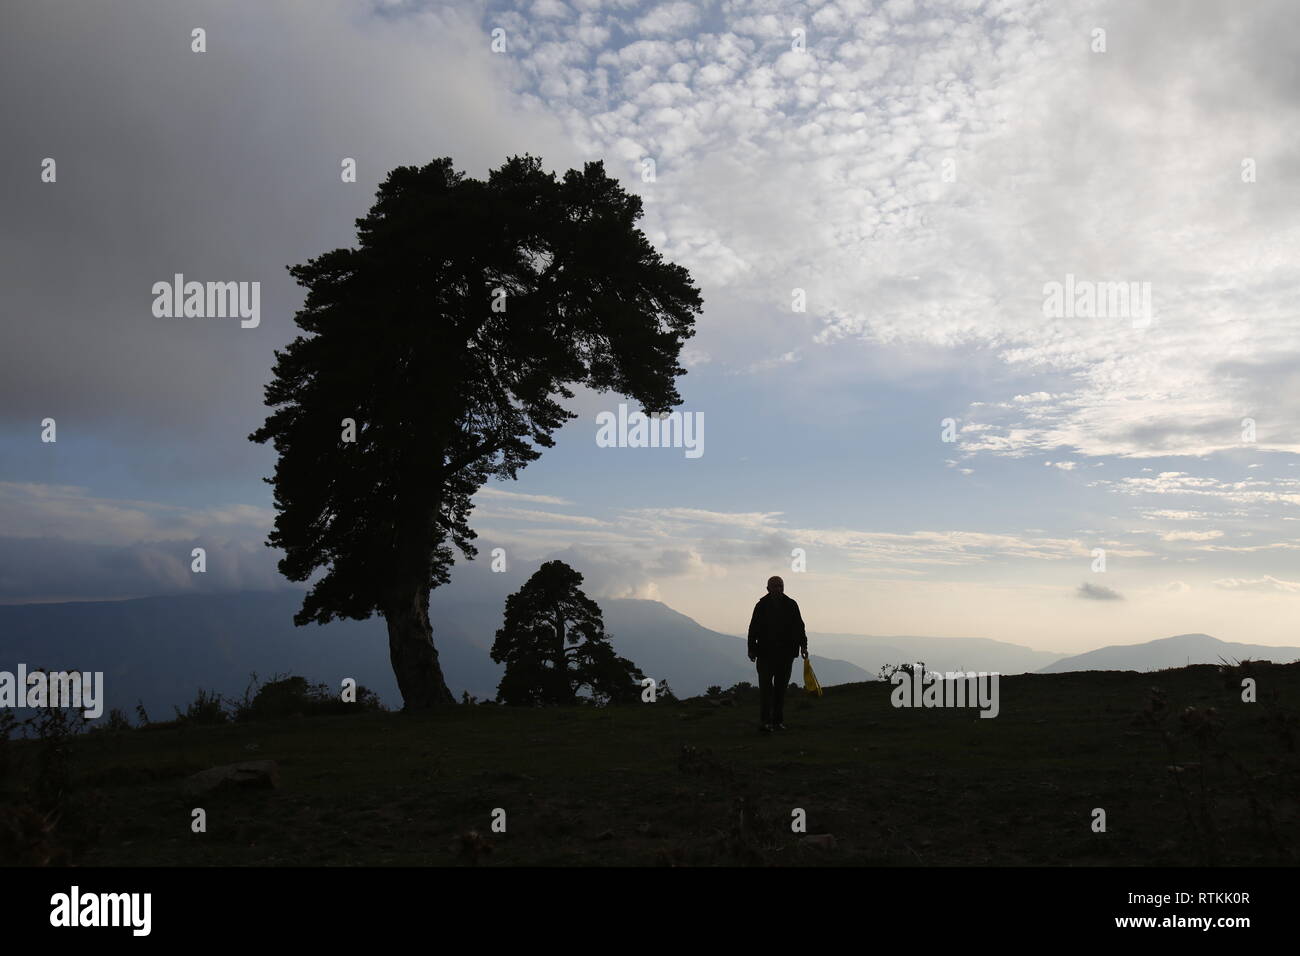 Amazing Nature Landscape and a man Stock Photo